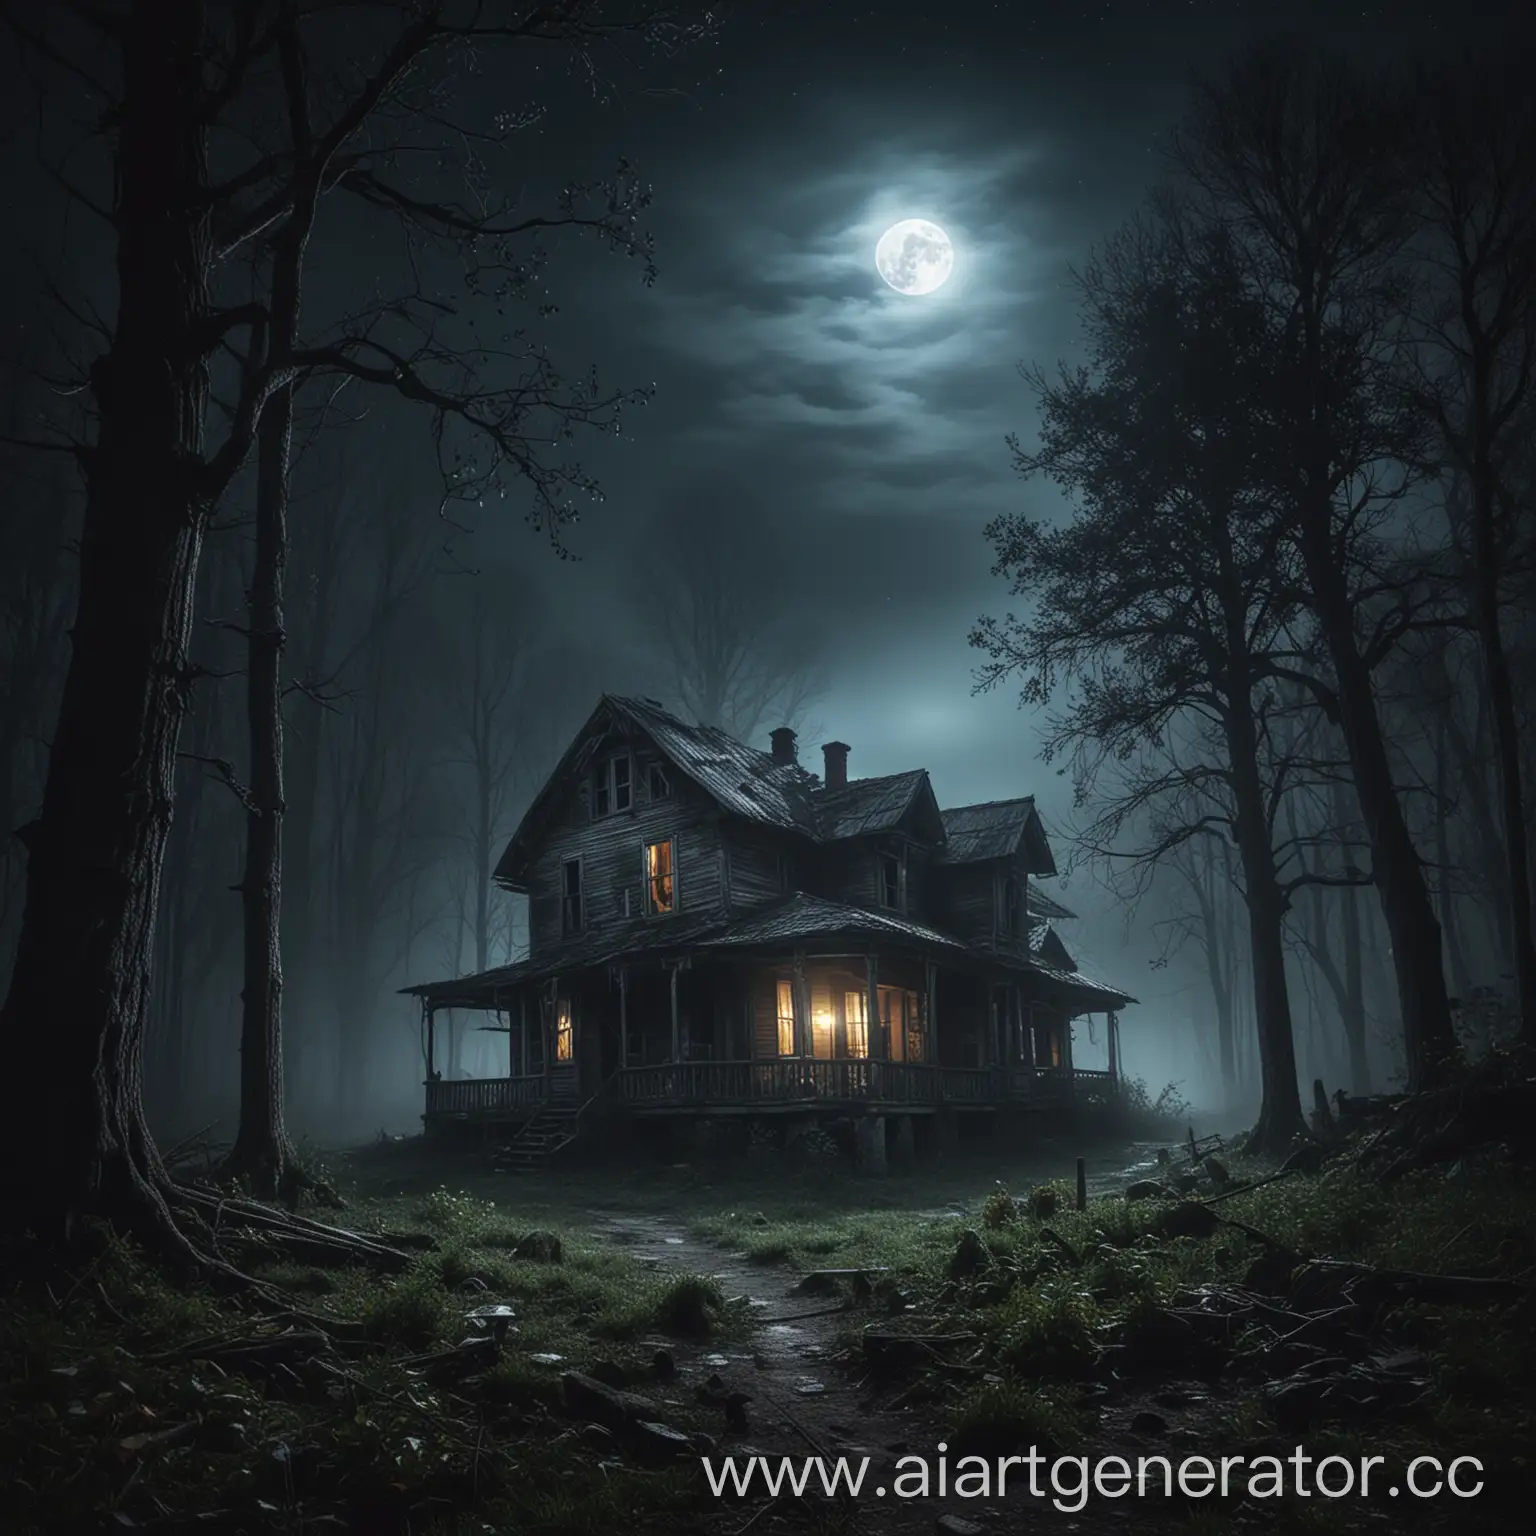 Mysterious-Moonlit-Night-Old-Abandoned-House-in-the-Forest